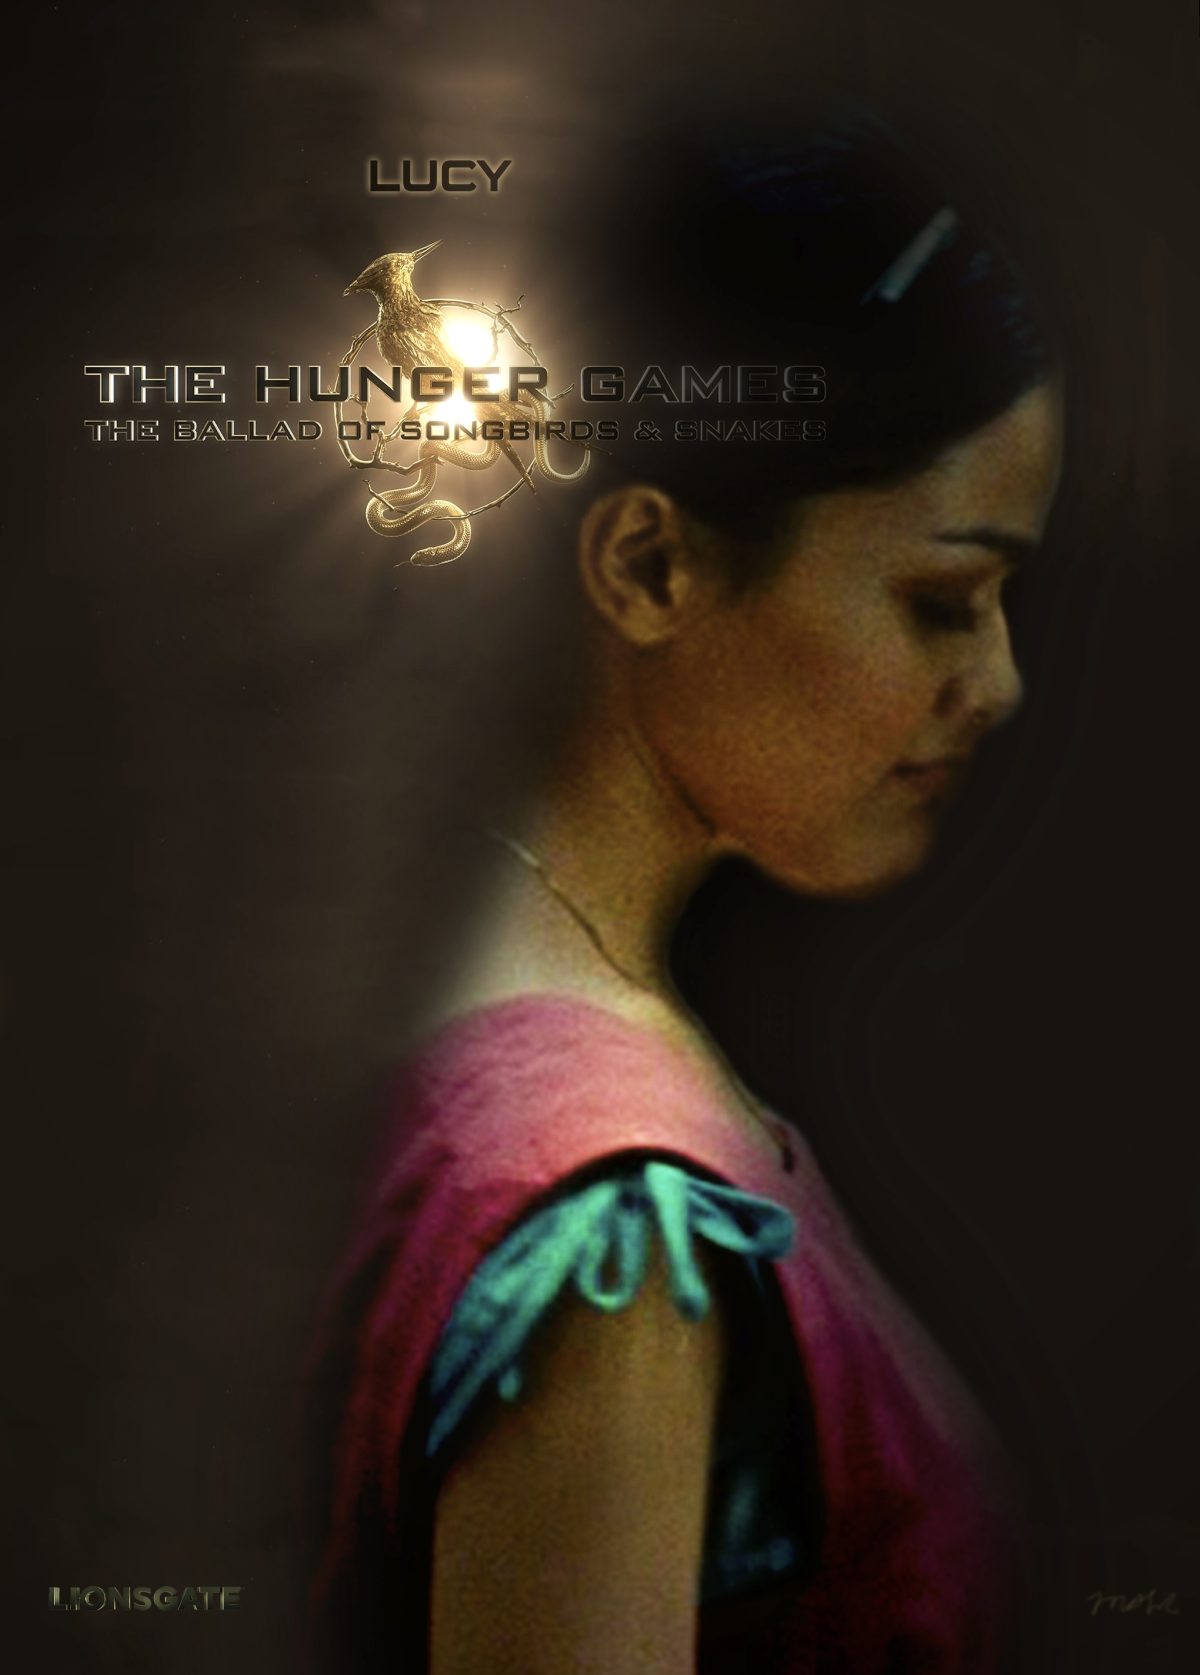 The Hunger Games The Ballad Of Songbirds And Snakes Concept Poster